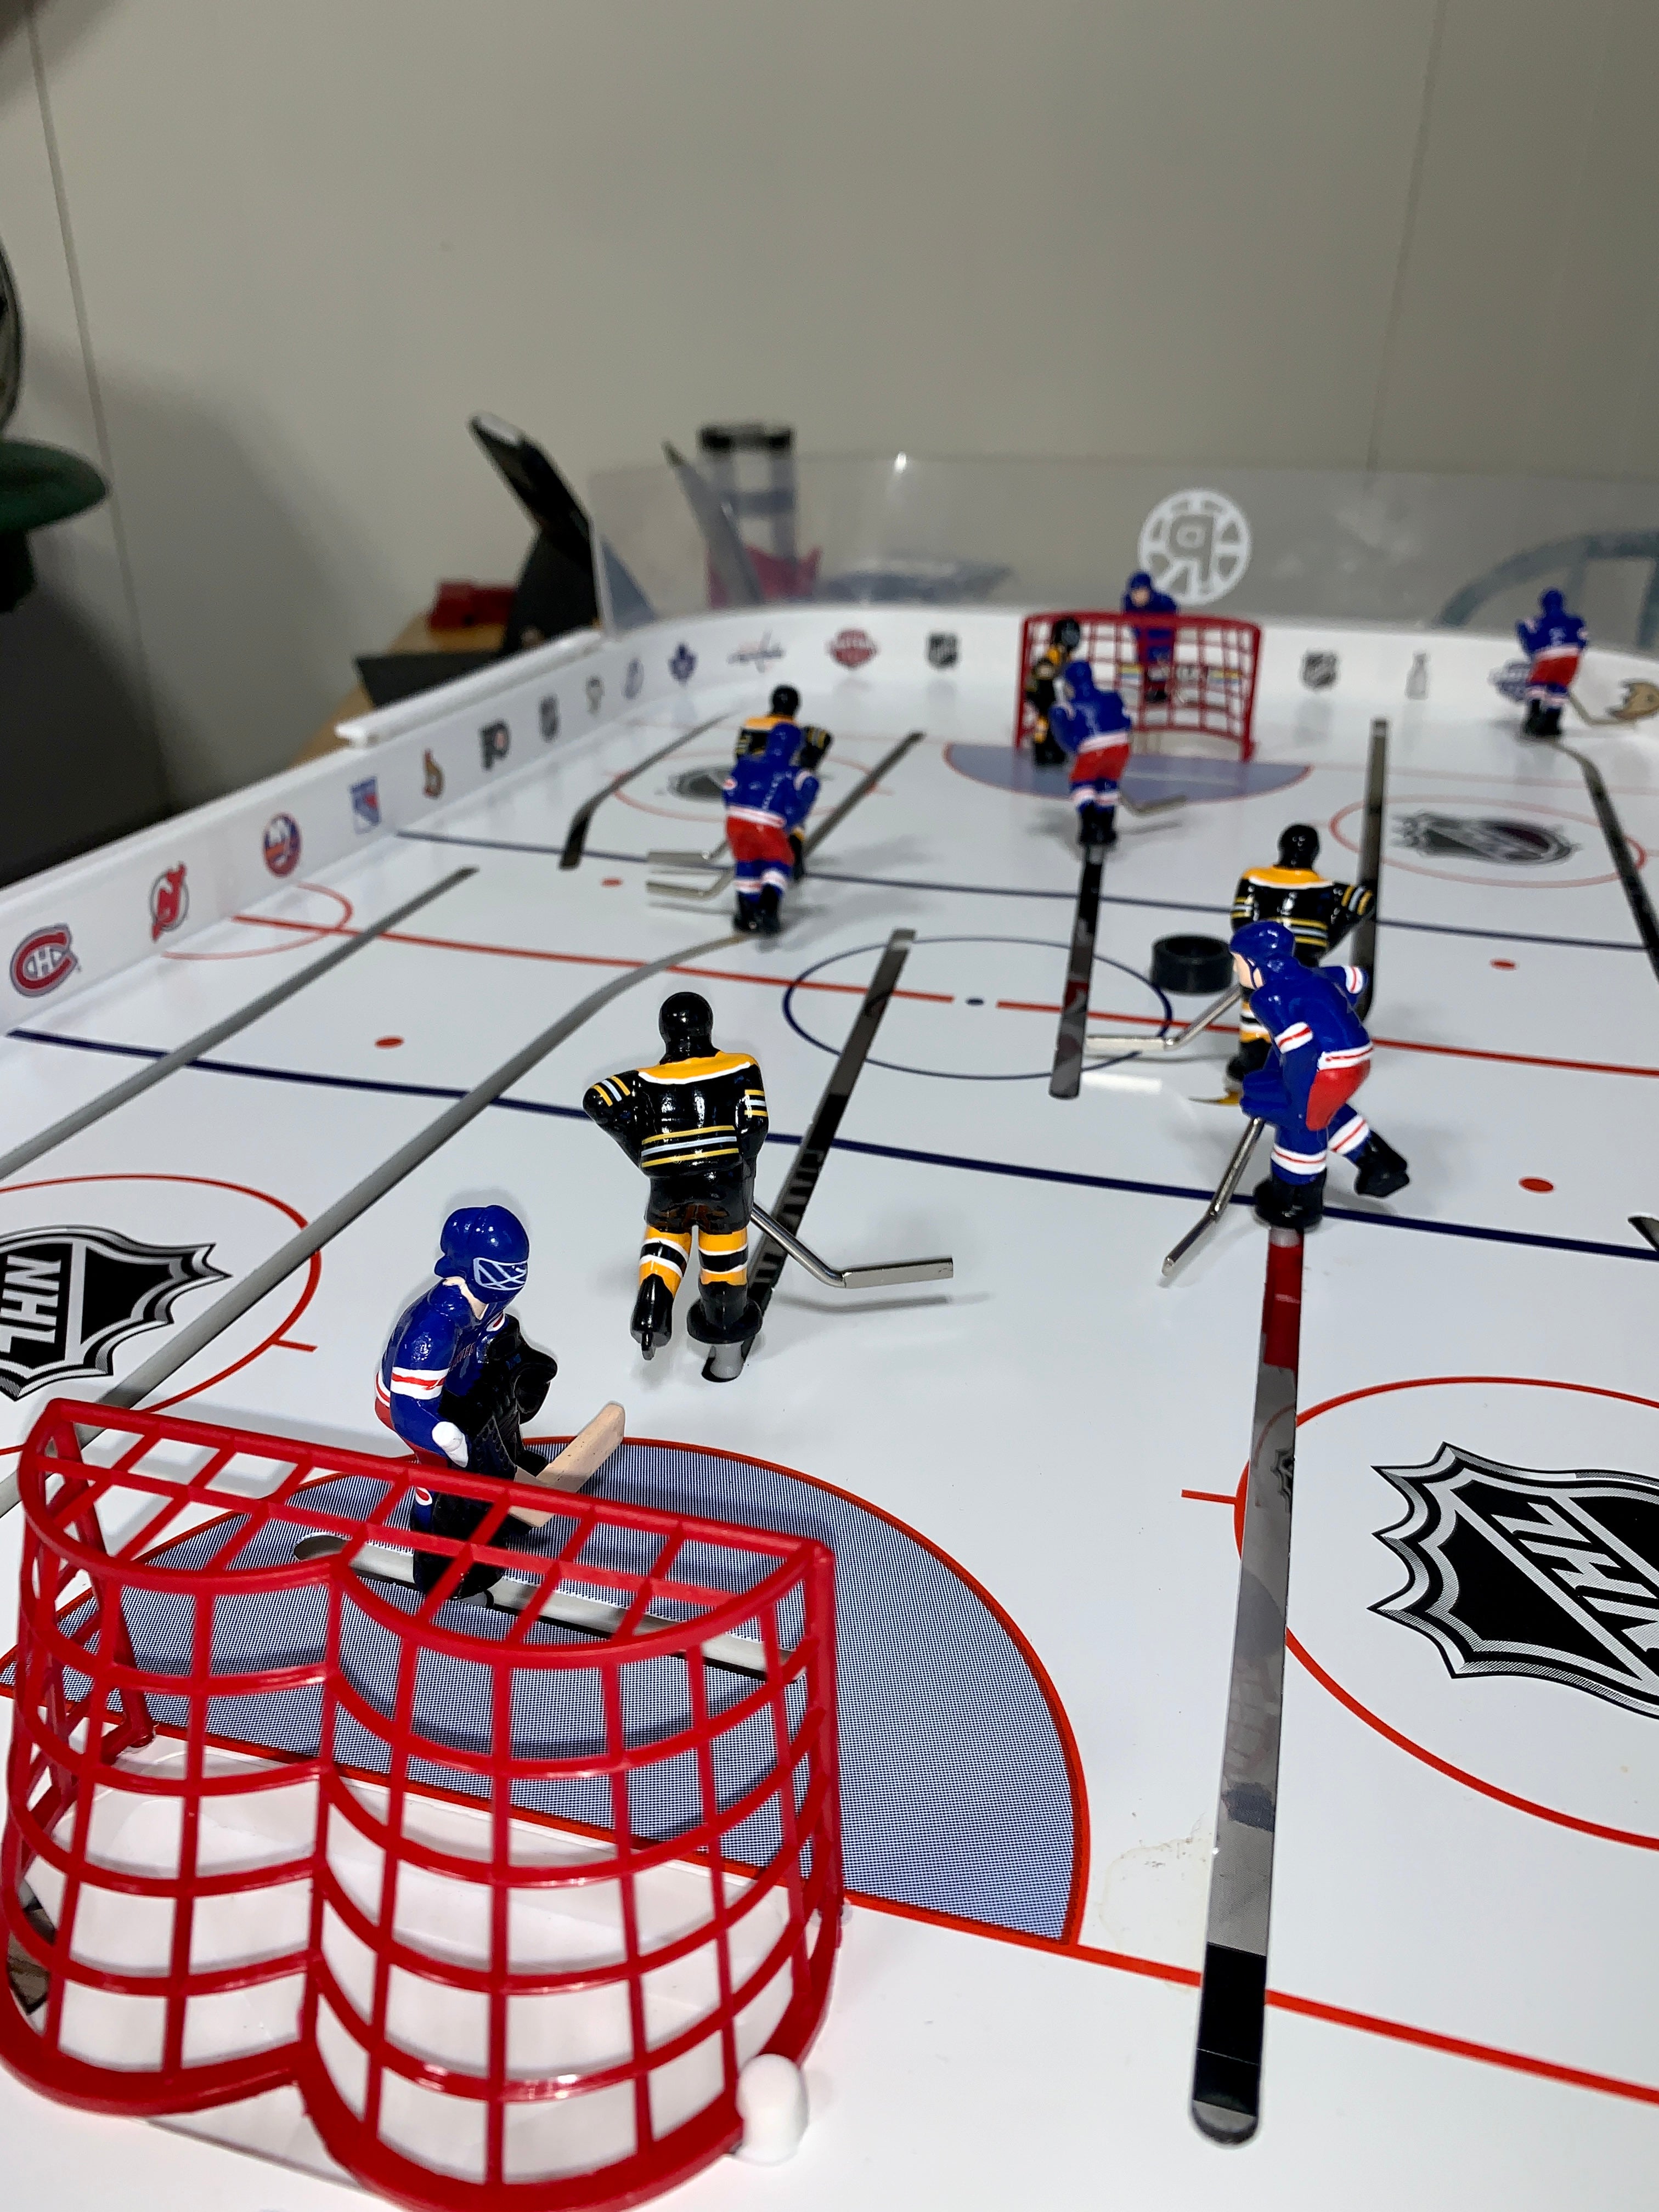 STIGA NHL STANLEY CUP HOCKEY Table Hockey Game - toy with 4 teams!